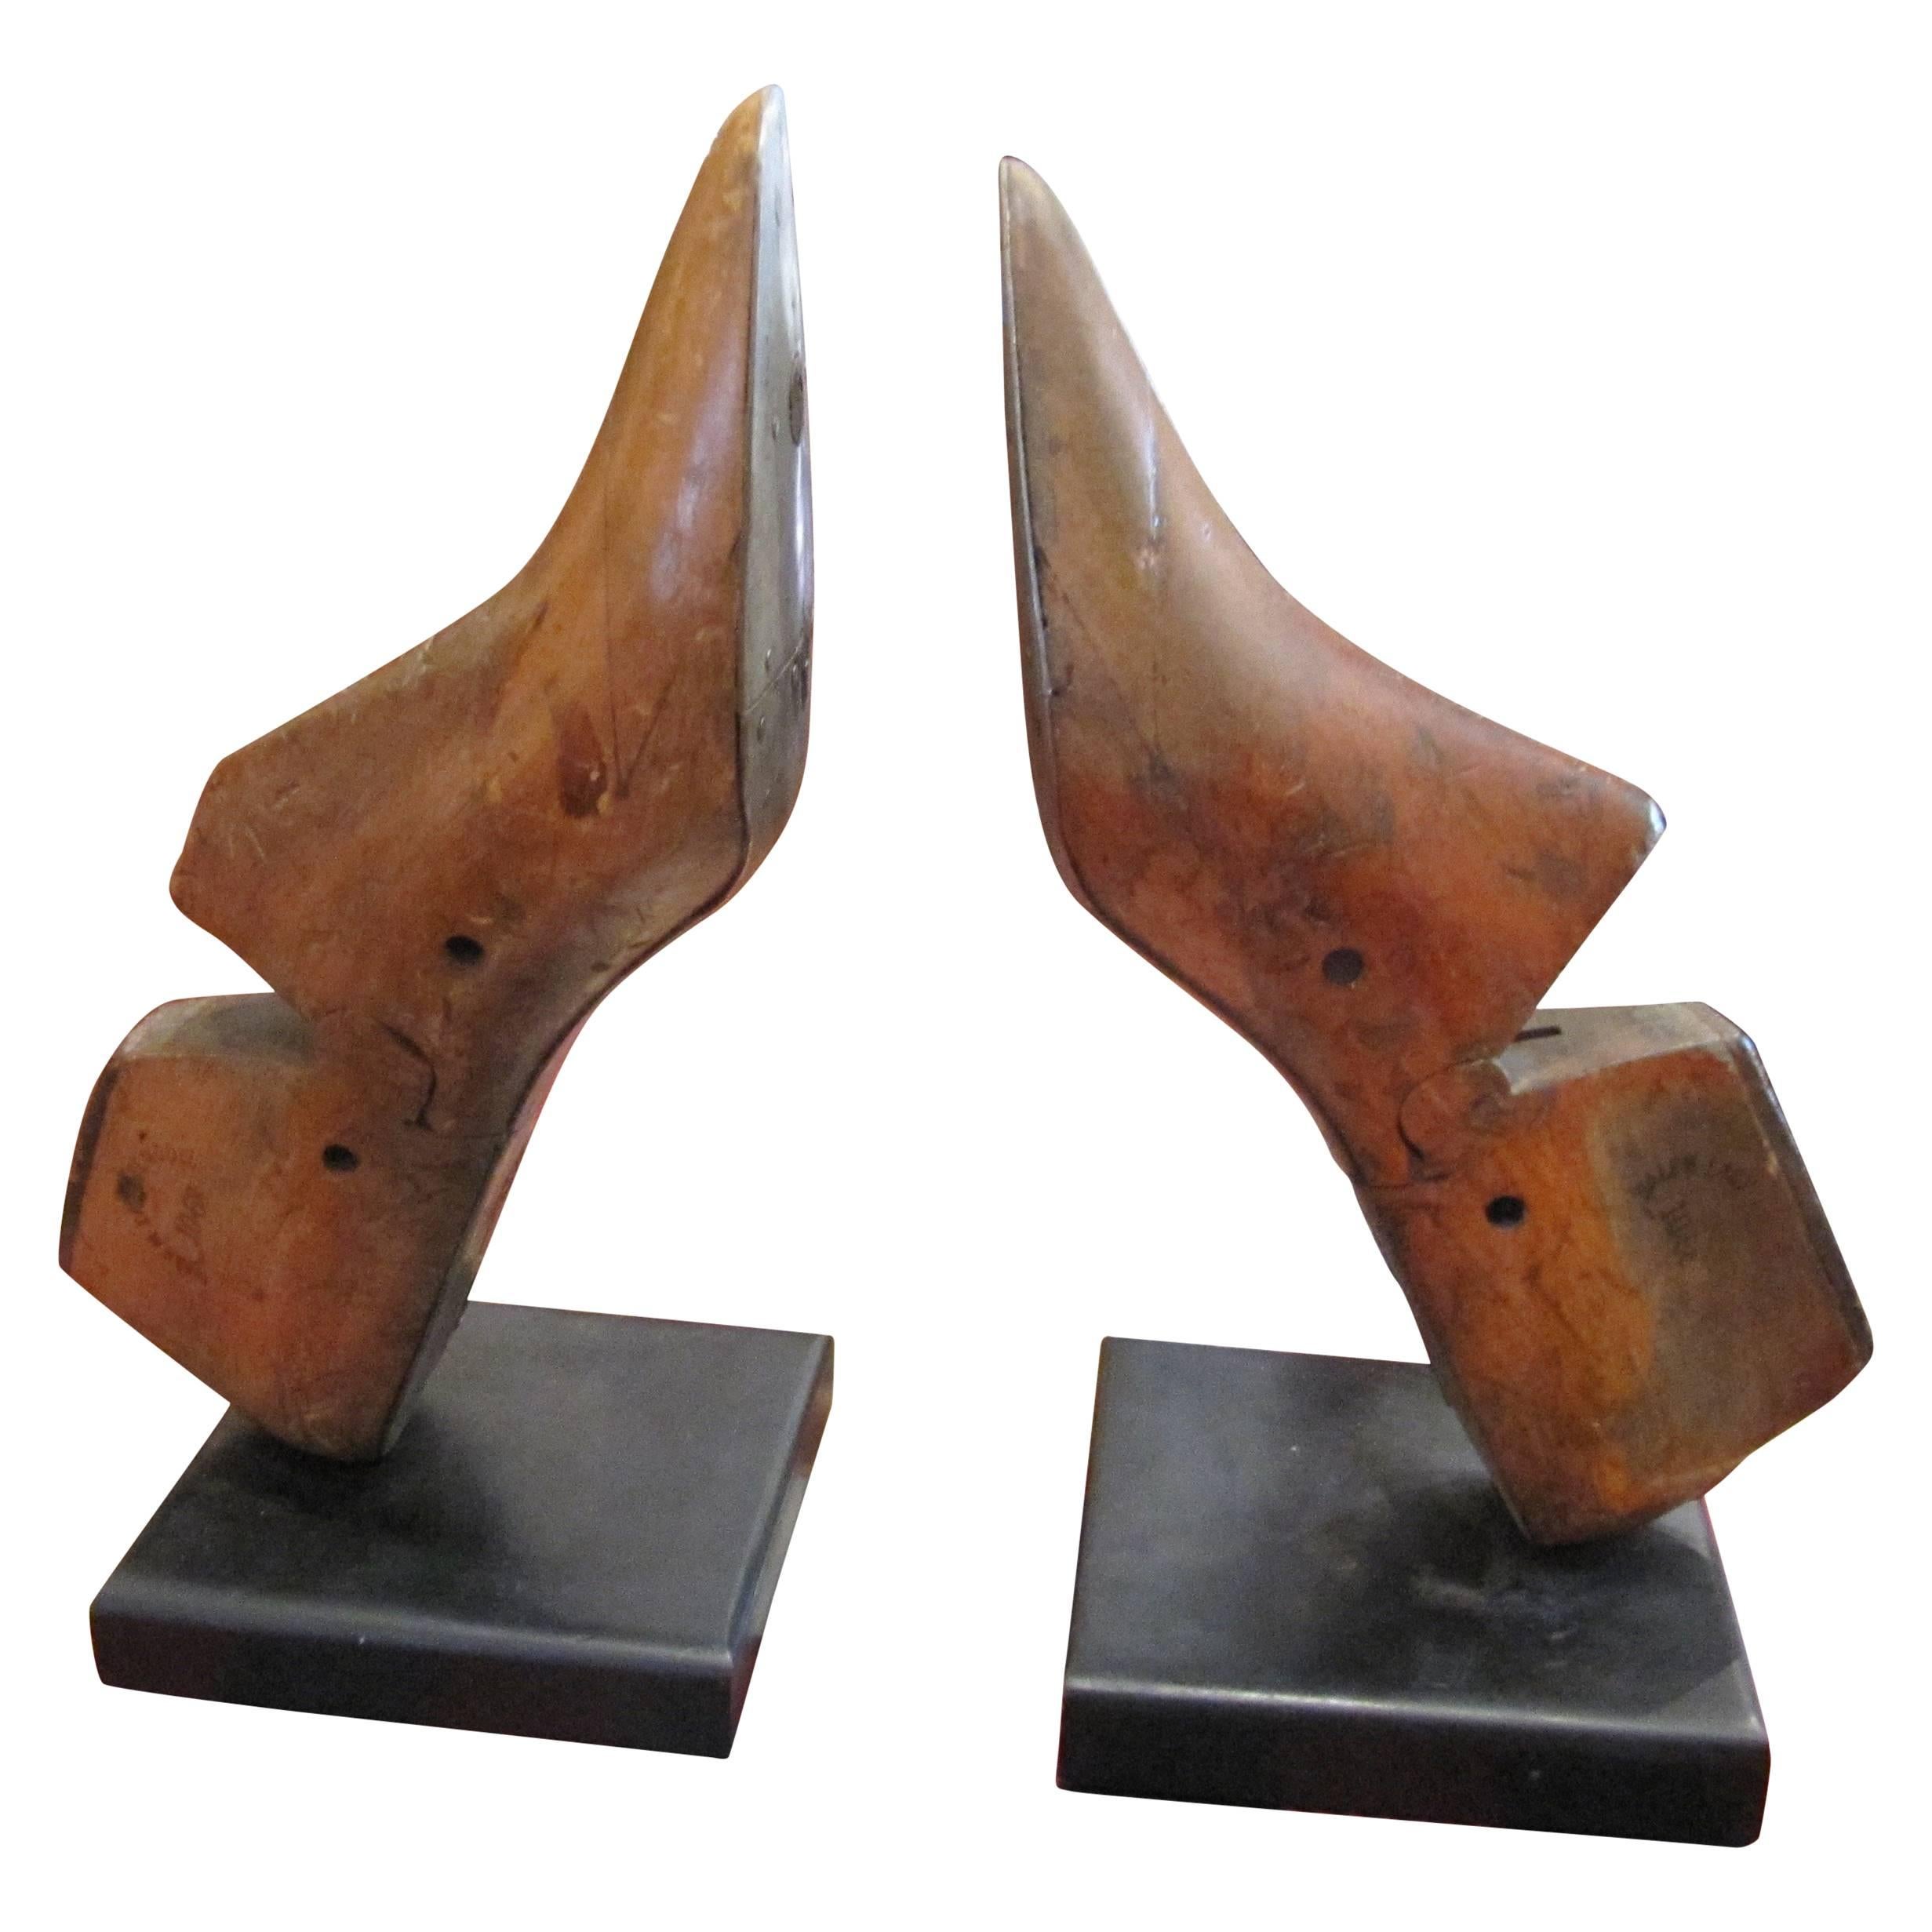 One Pair of Charming Wooden Shoe Moulds Mounted as Bookends Great Character. For Sale